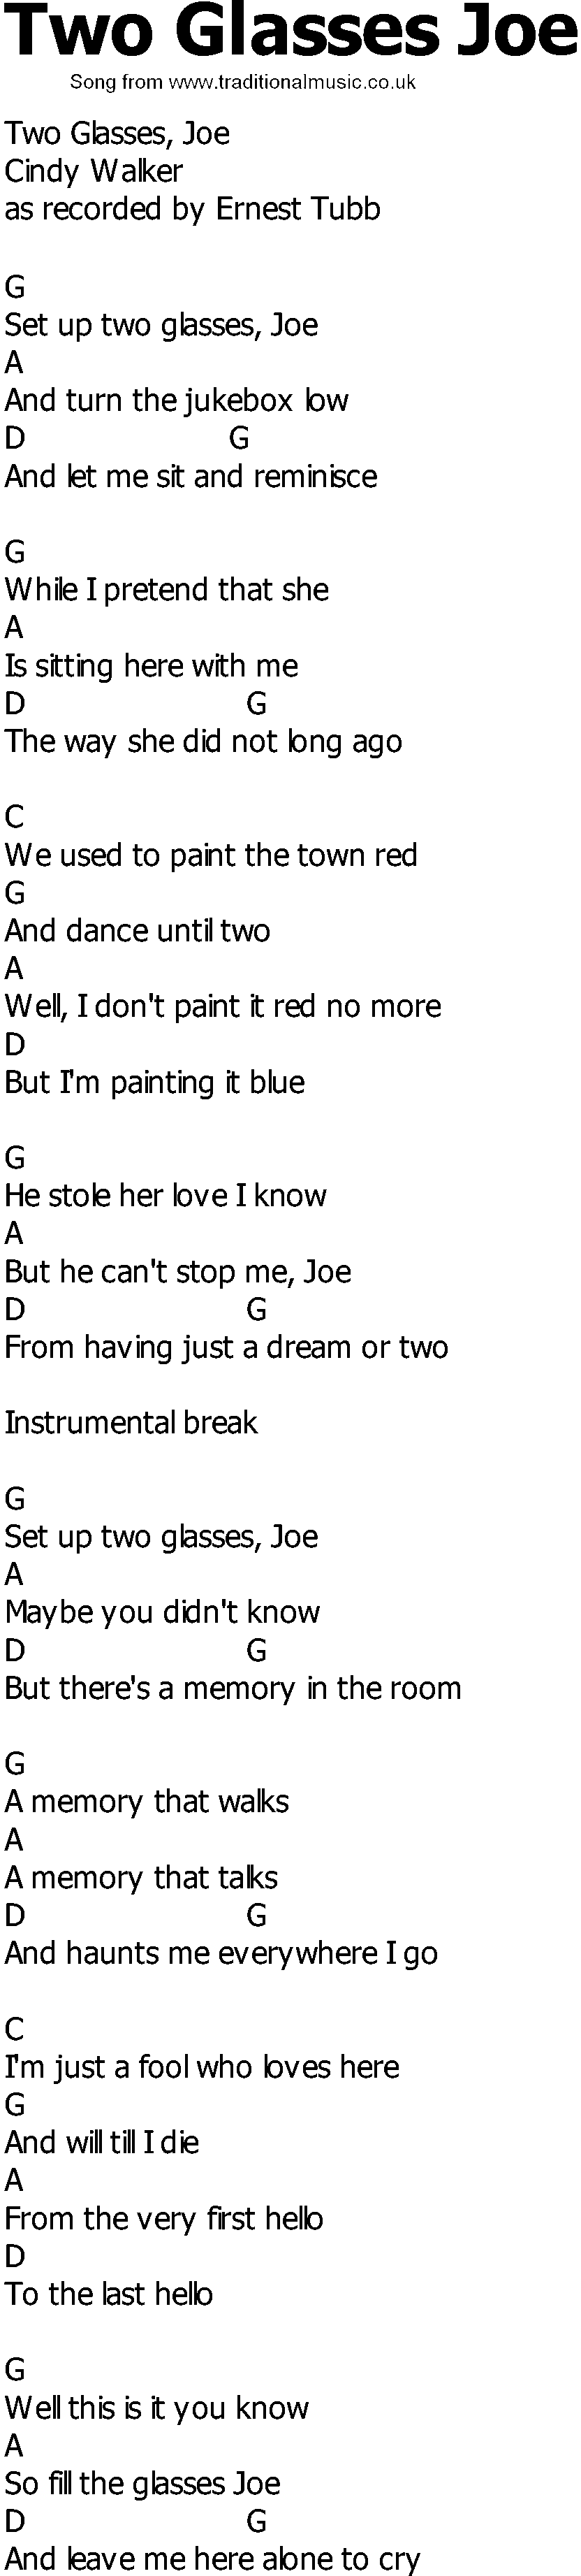 Old Country song lyrics with chords - Two Glasses Joe